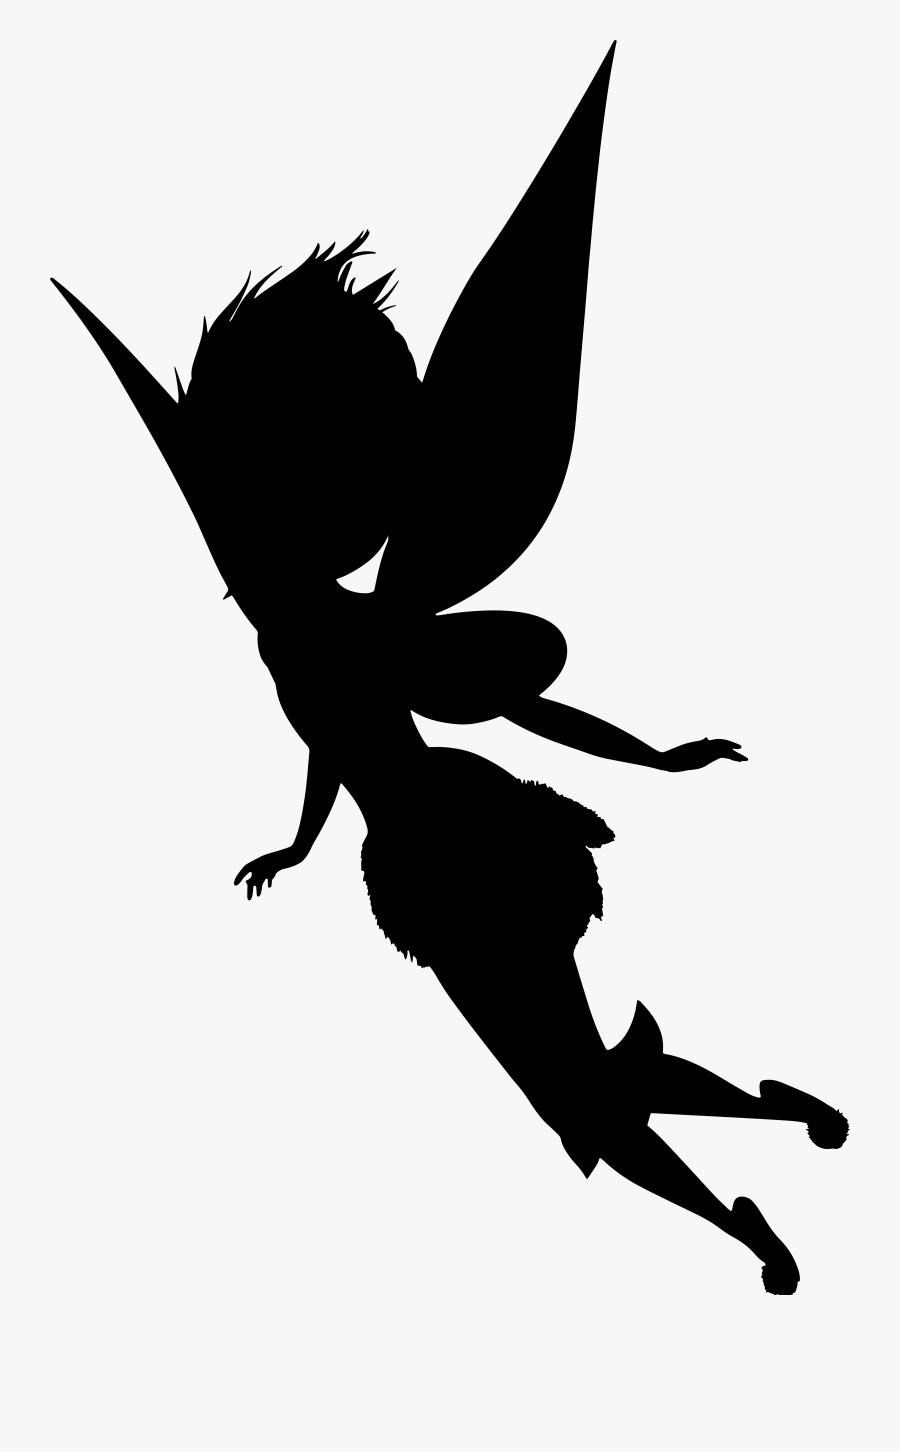 Vector Freeuse Image Result For Fairy - Fairy Silhouette No Background, Transparent Clipart